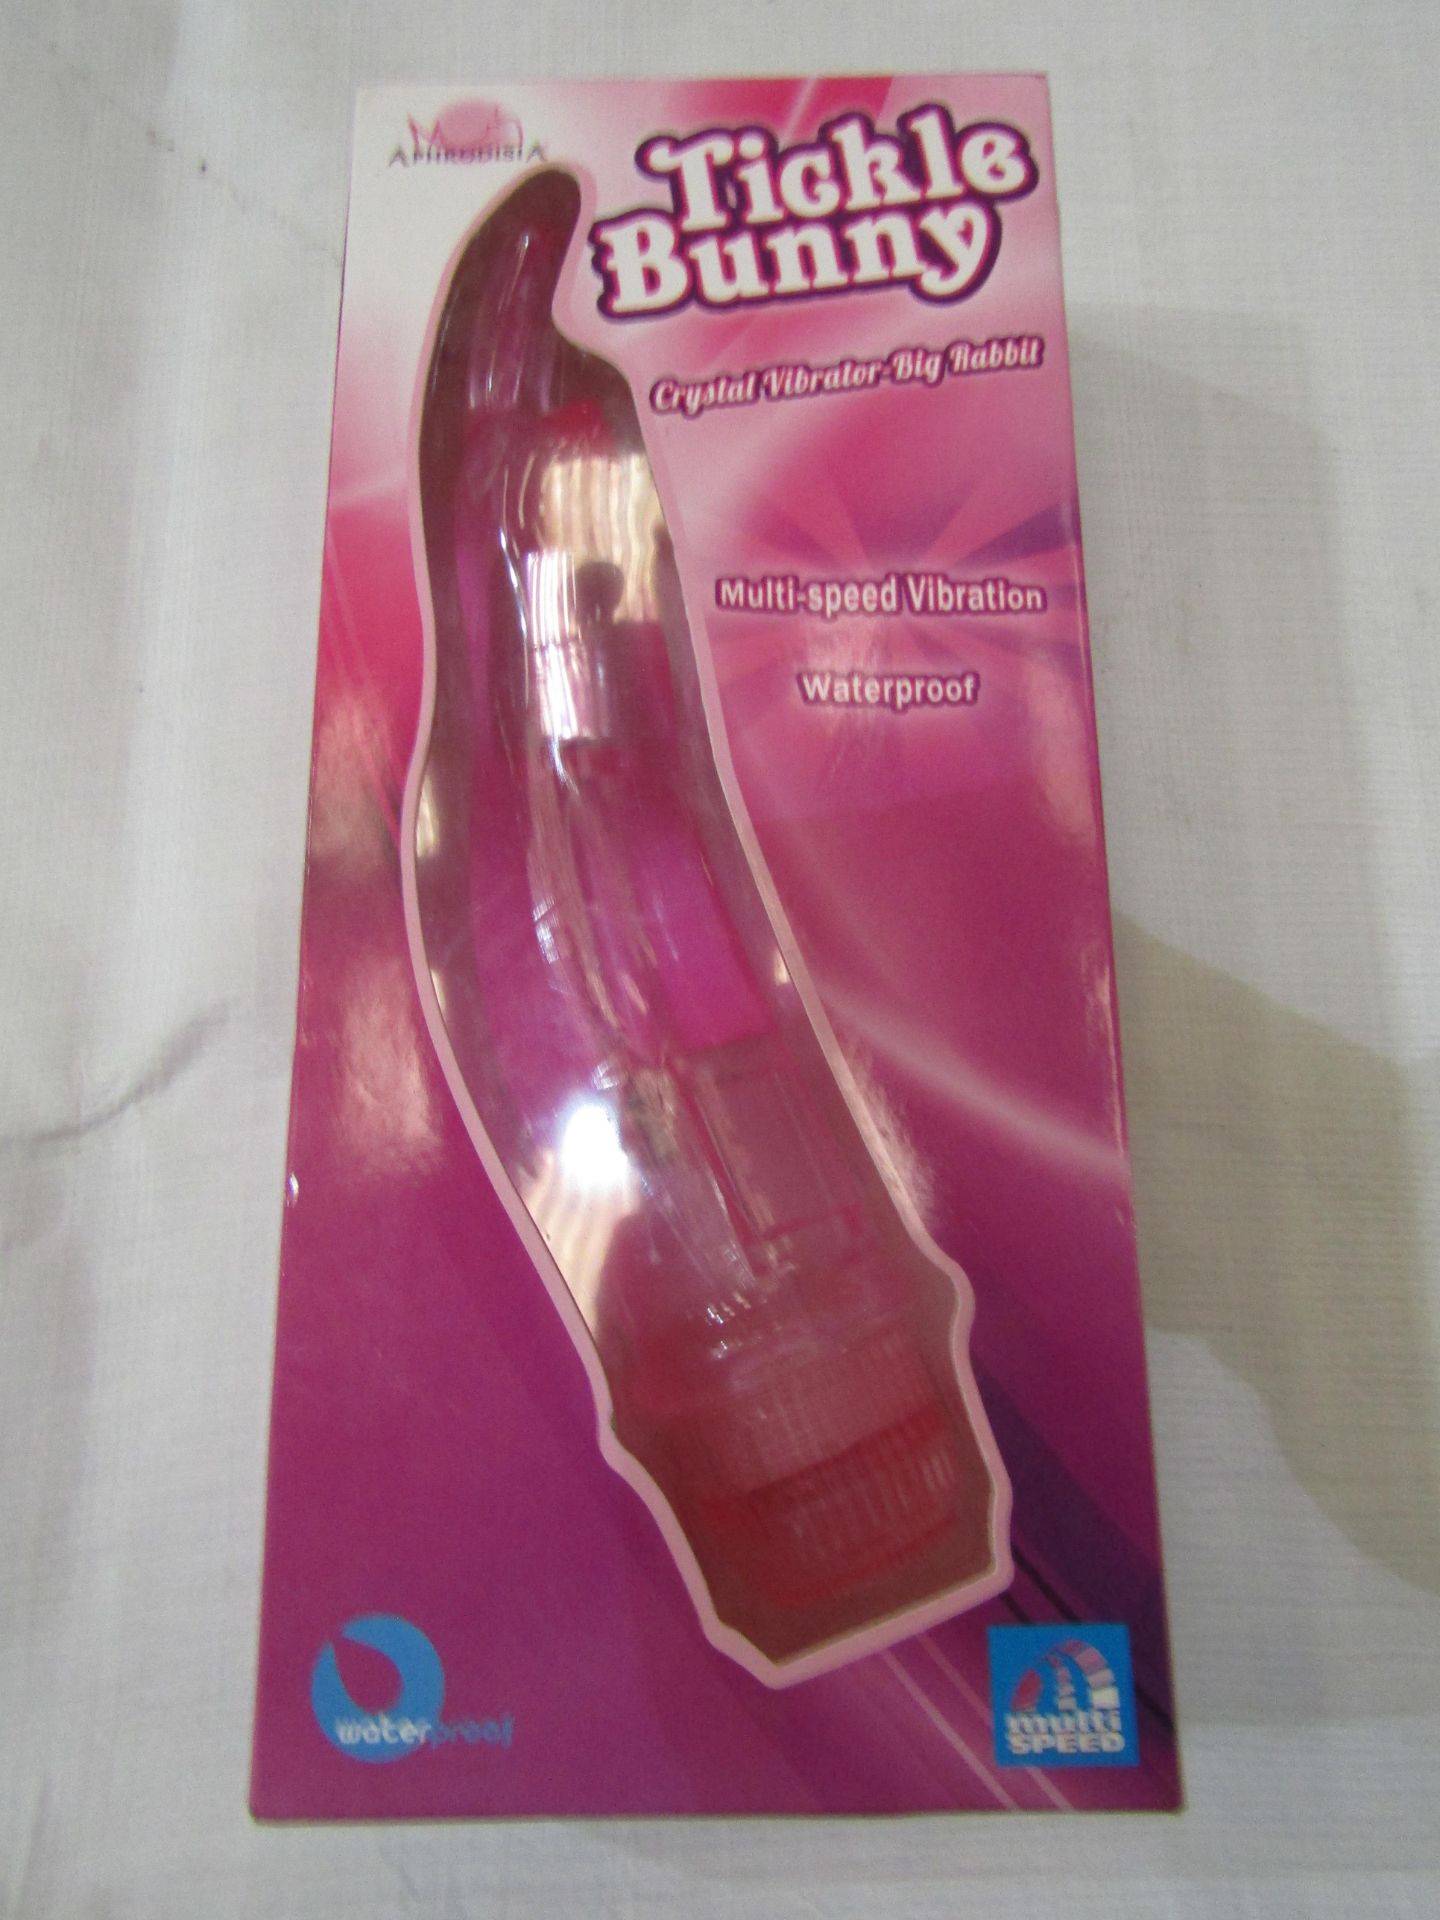 Aphrodisia Waterproof Tickle Bunny Crystal Vibrator With Multi-Speed Vibration - New & Boxed.